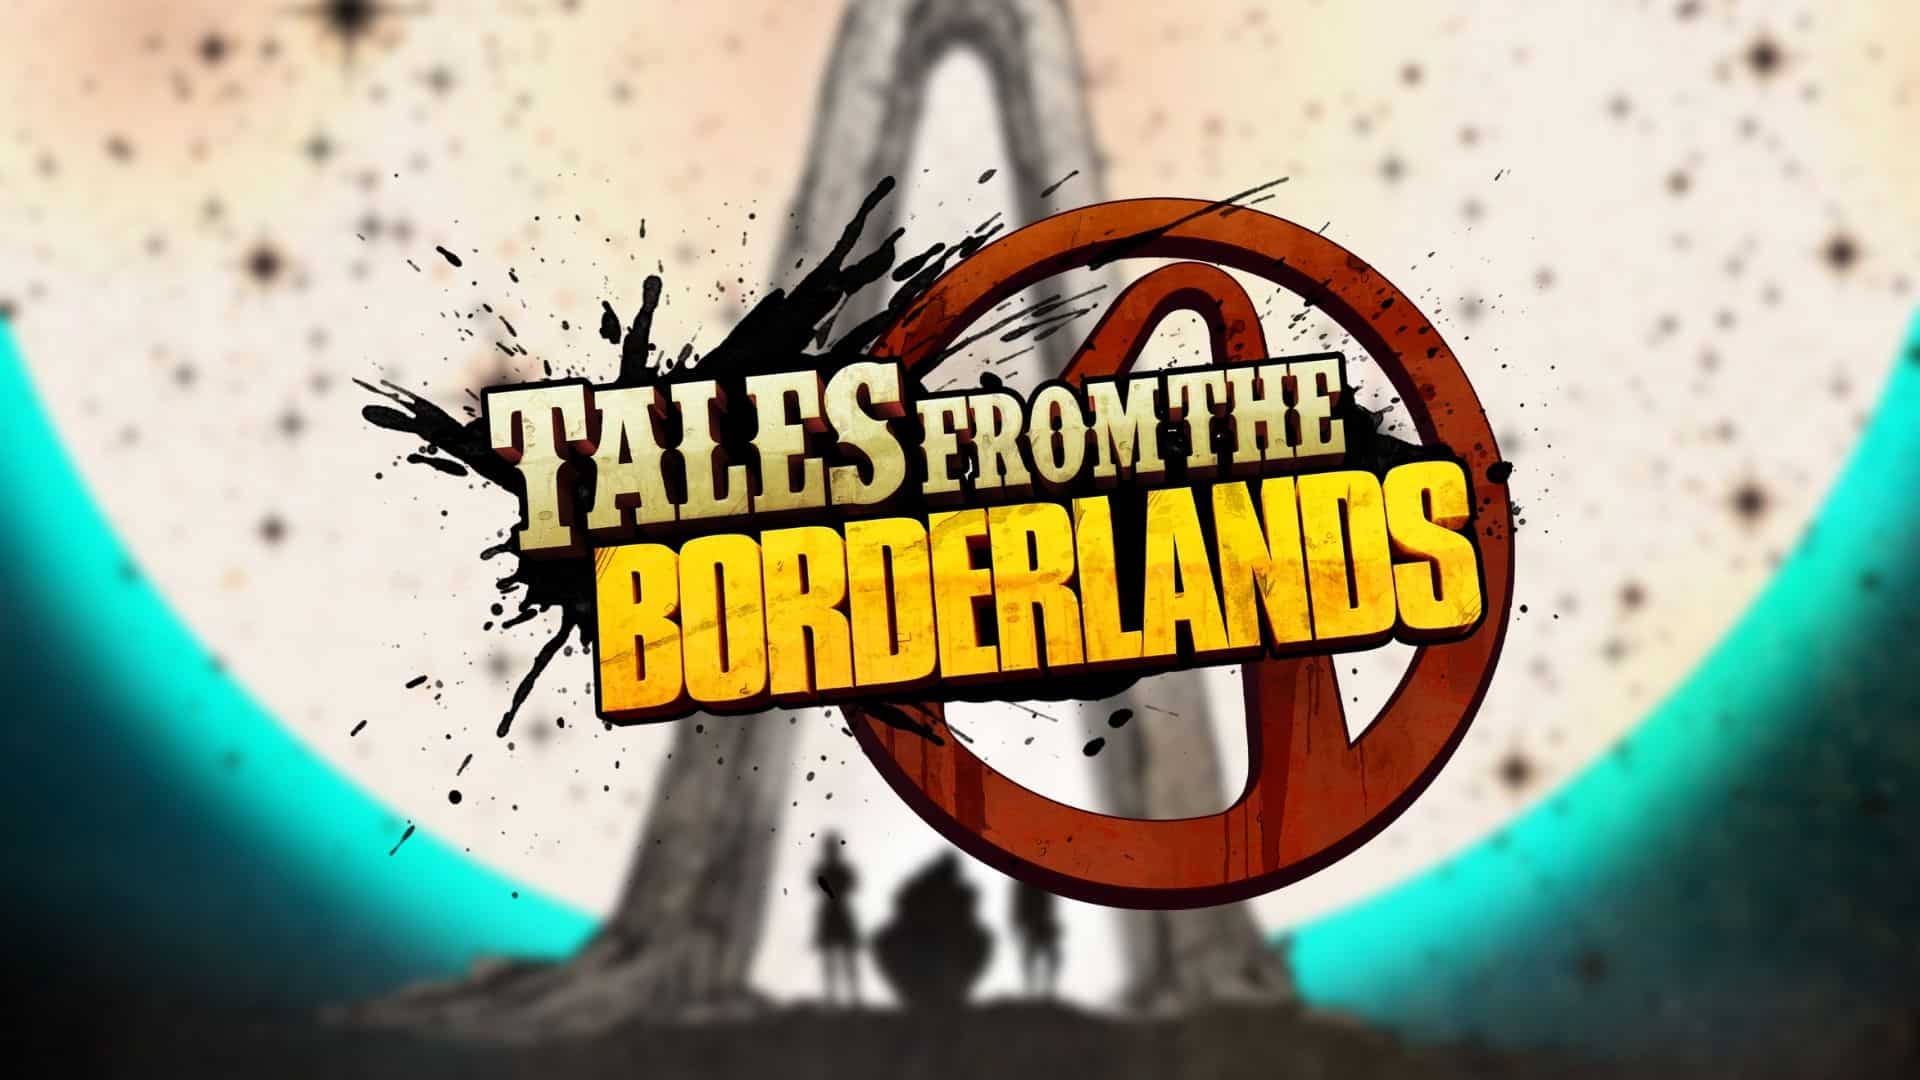 tales from the borderlands logo